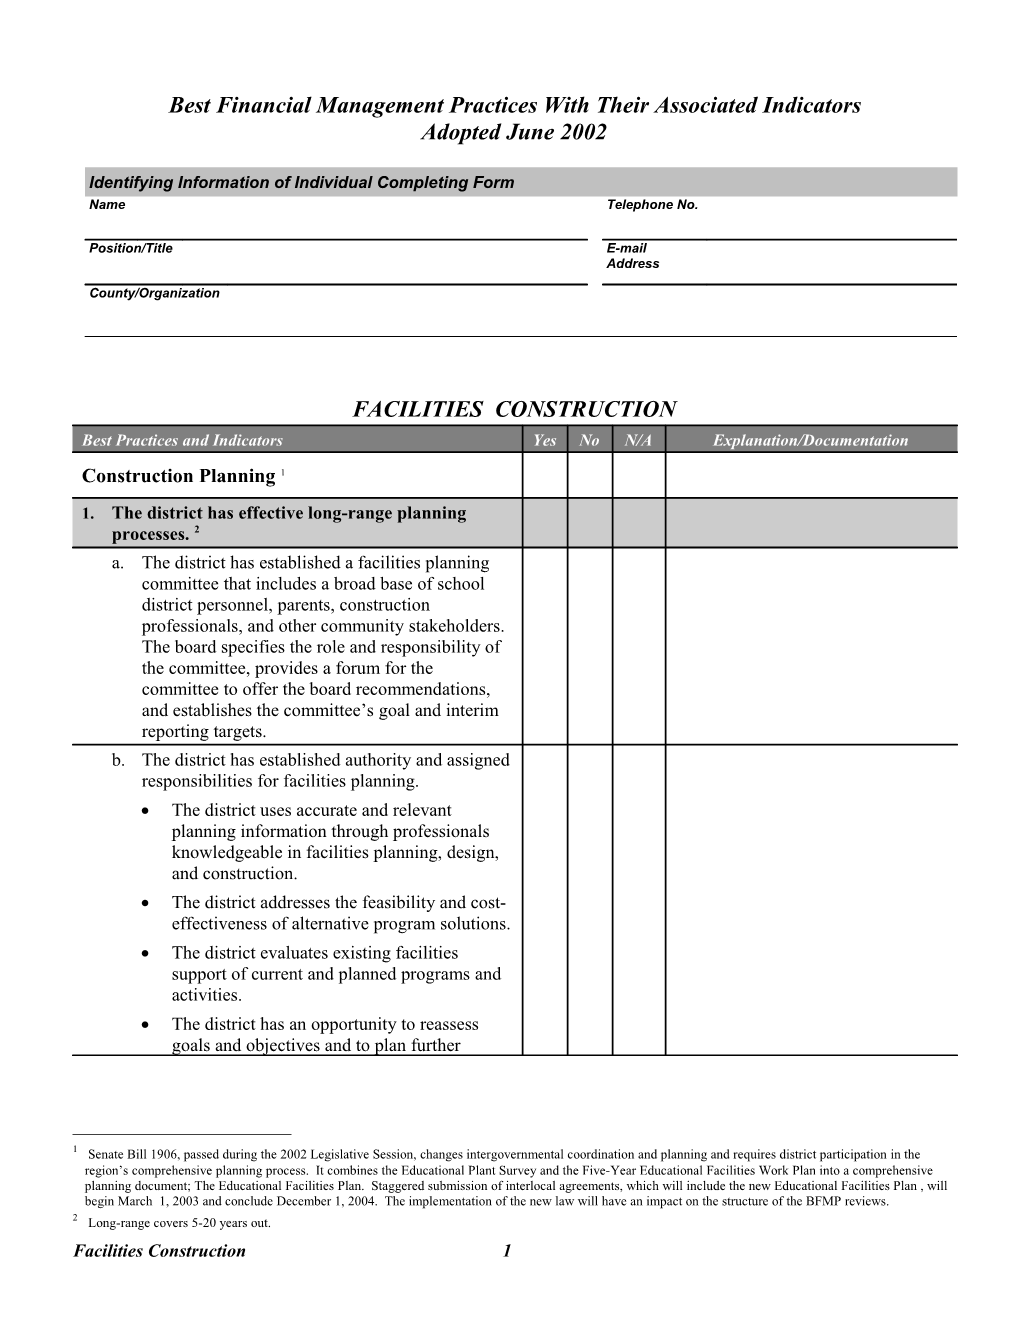 Identifying Information of Individual Completing Form